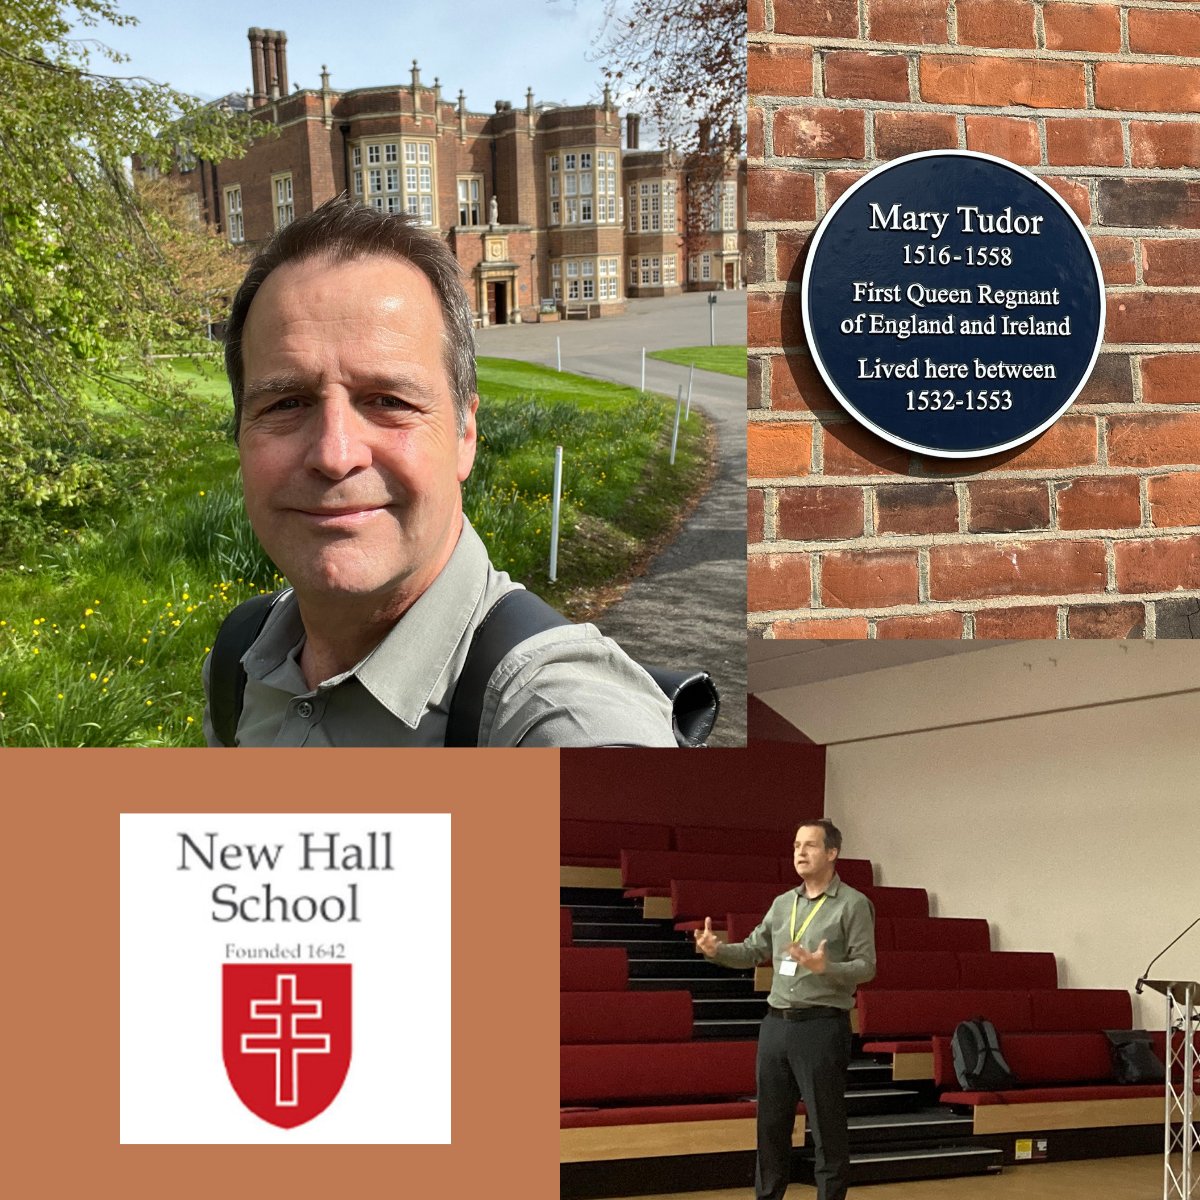 It's not everyday that I get to work in a former Royal Palace! 👑

It was great to be back at @NewHallSchool yesterday, working at the home of Mary Tudor.

🔗 #LinkedIn - Year 13
🎓 #DegreeApprenticeship Application Workshop 
🔎 How to Find a #WorkExperience Placement - Year 11